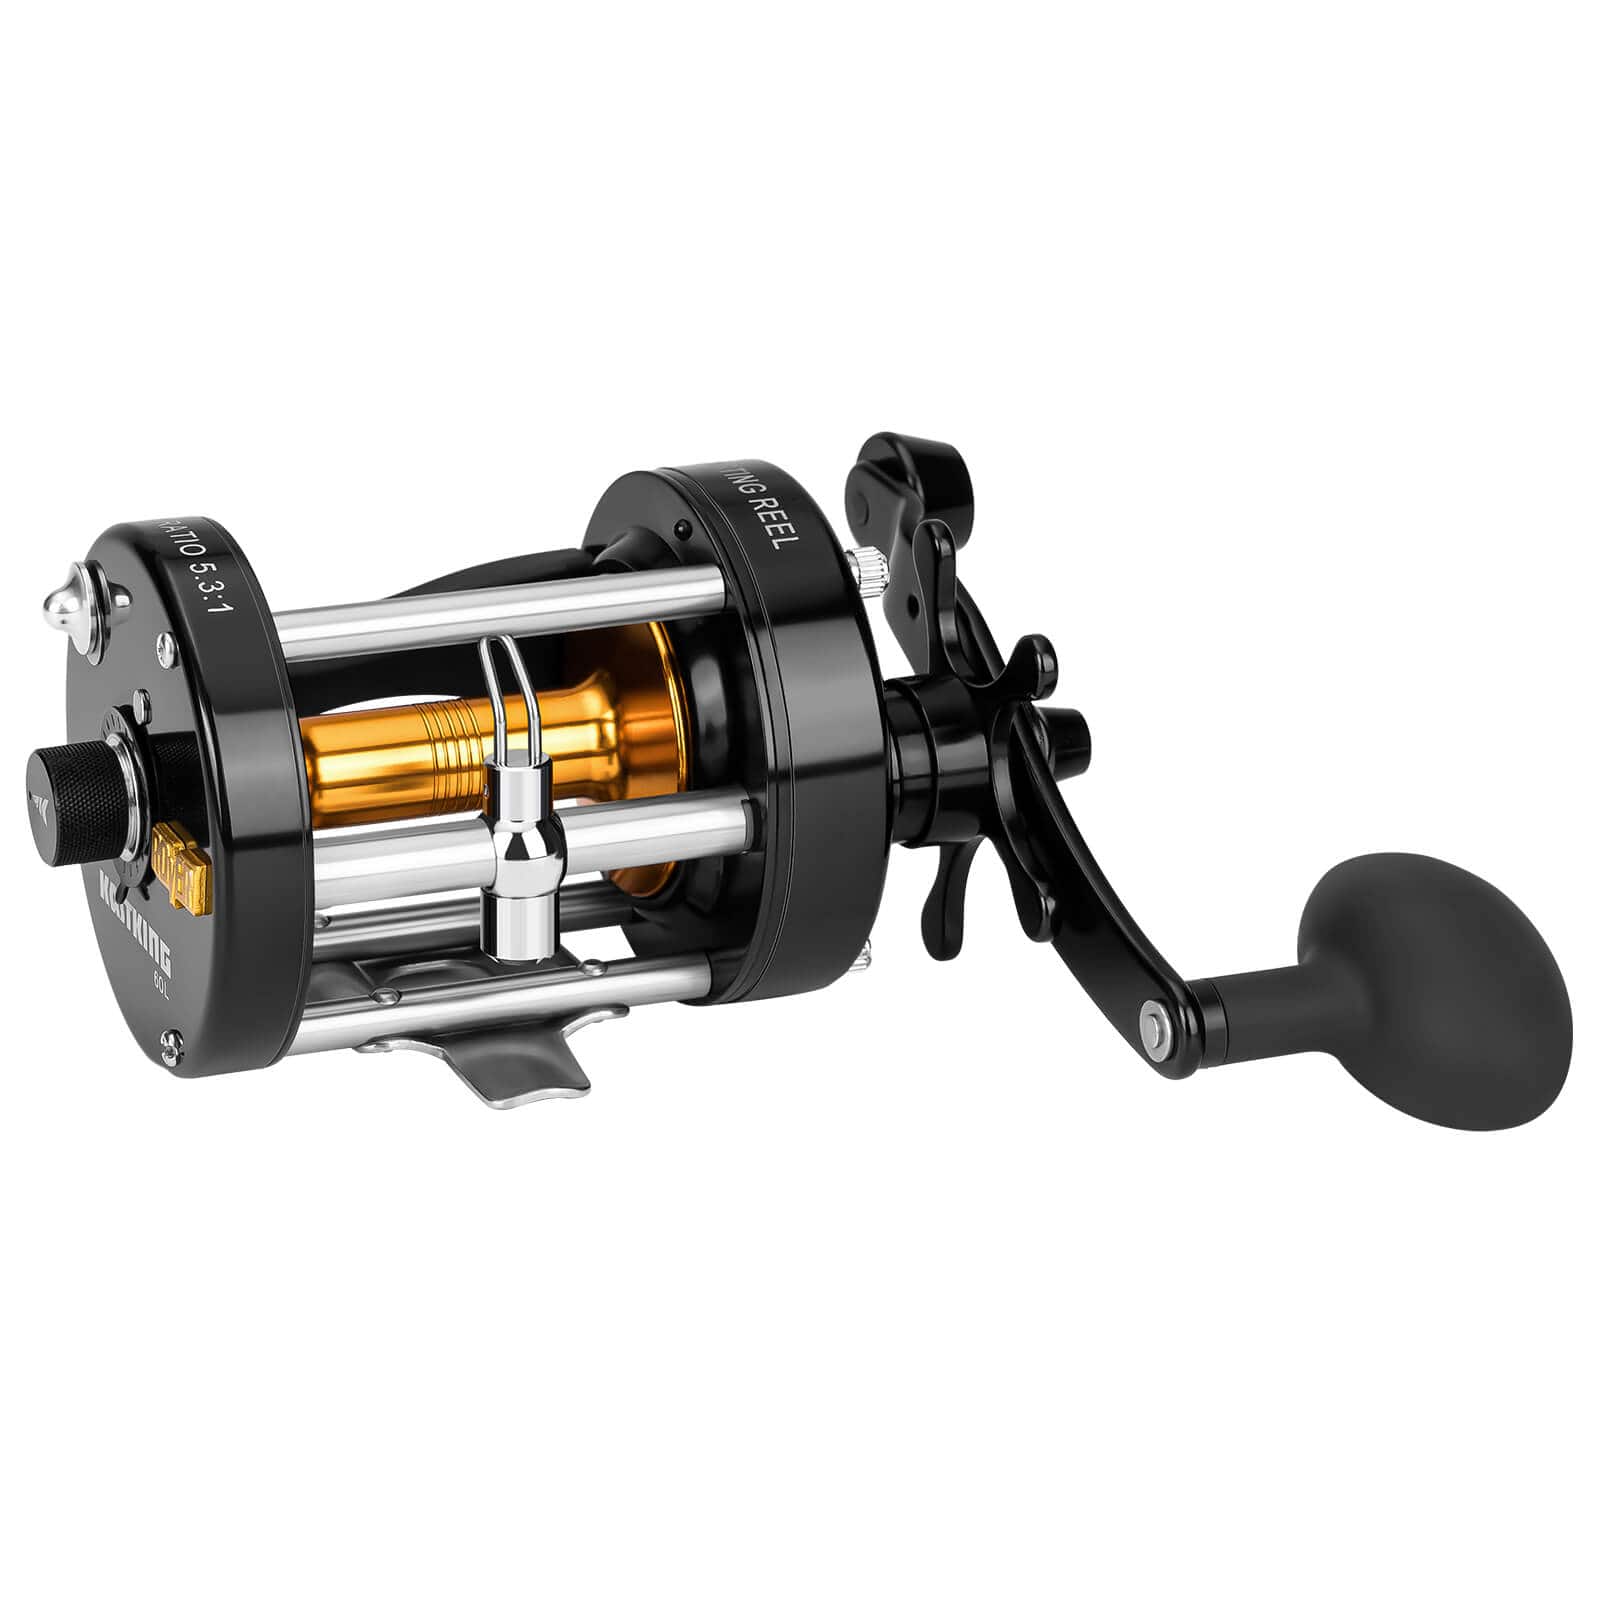 KastKing Rover 90: I am thinking of picking up two of these reels since the  reviews are great and they are not too overly price. Anyone use them and  any thoughts about